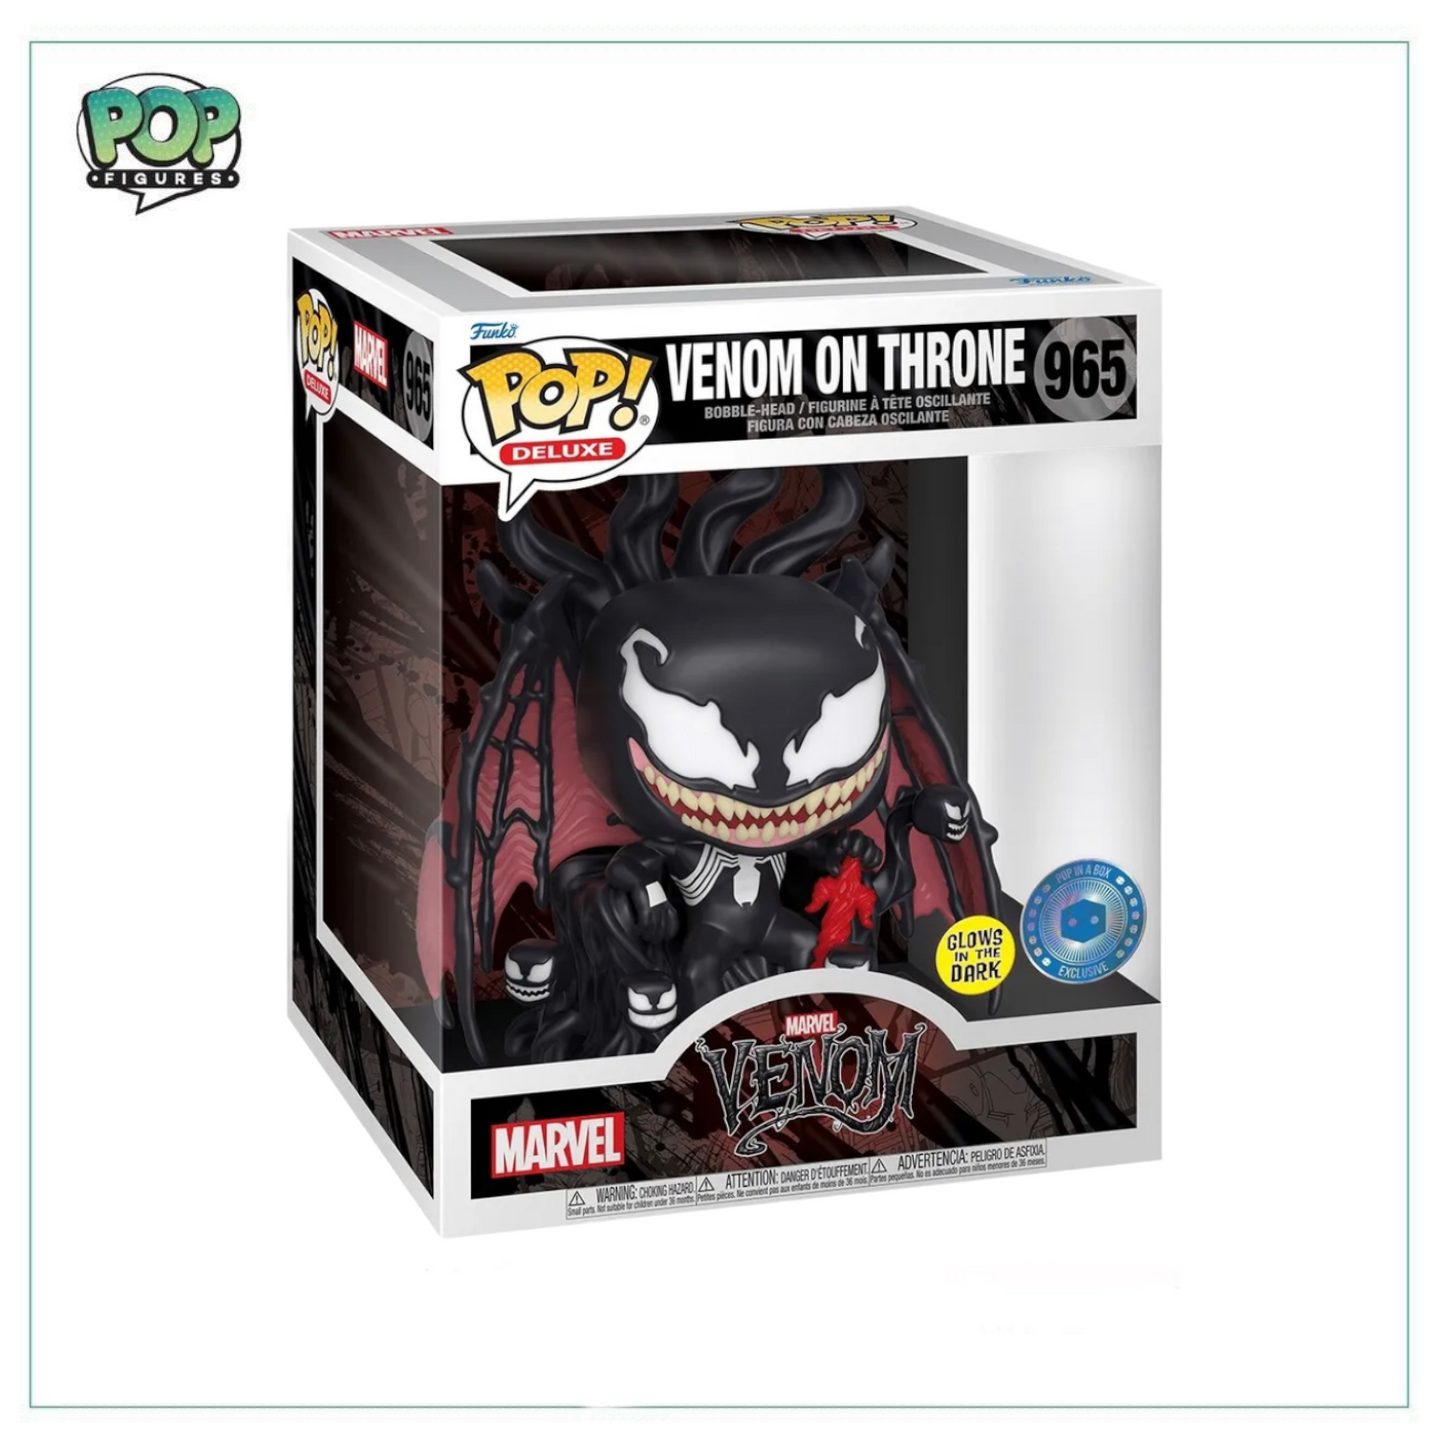 Venom On Throne (Glows In The Dark) #965 Deluxe Funko Pop! Marvel - Pop In A Box Exclusive - Angry Cat